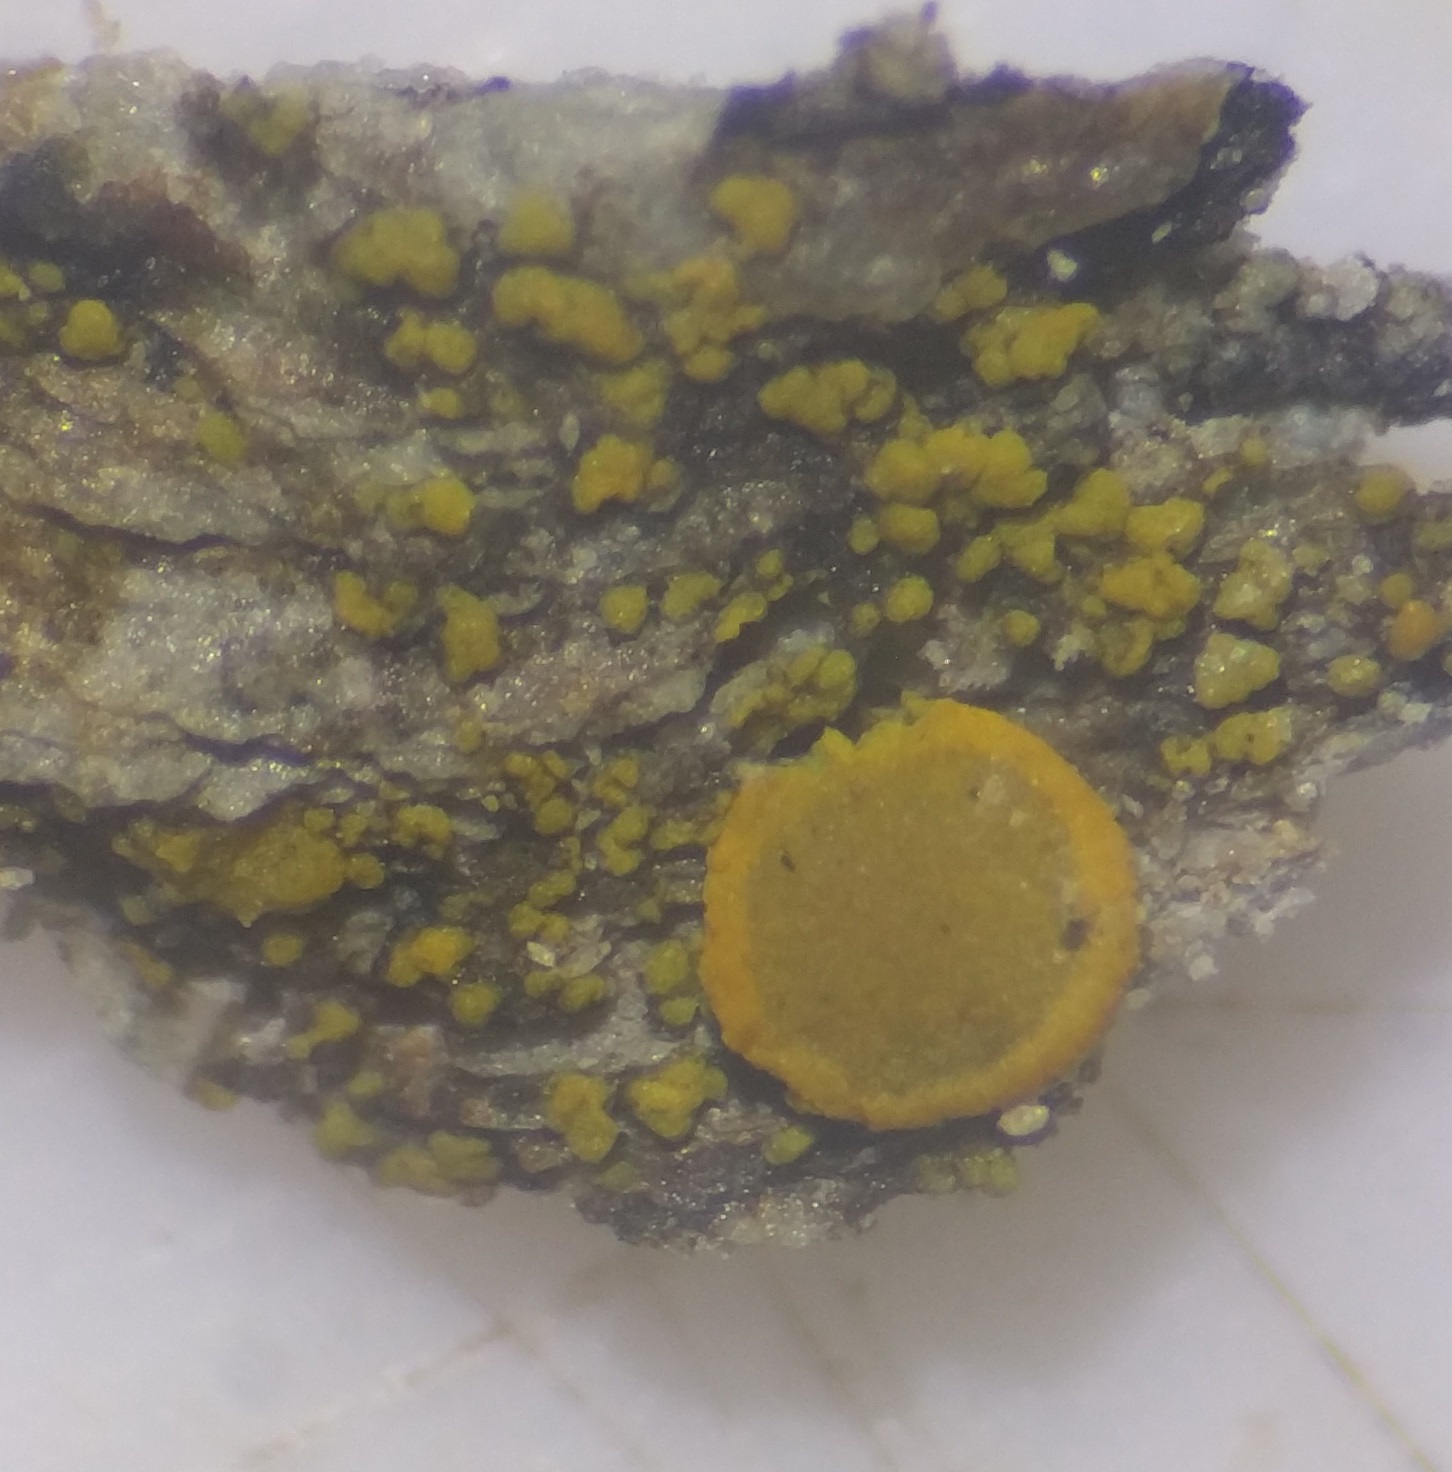 Caloplaca arcis has yellow thallus and fruit with margin